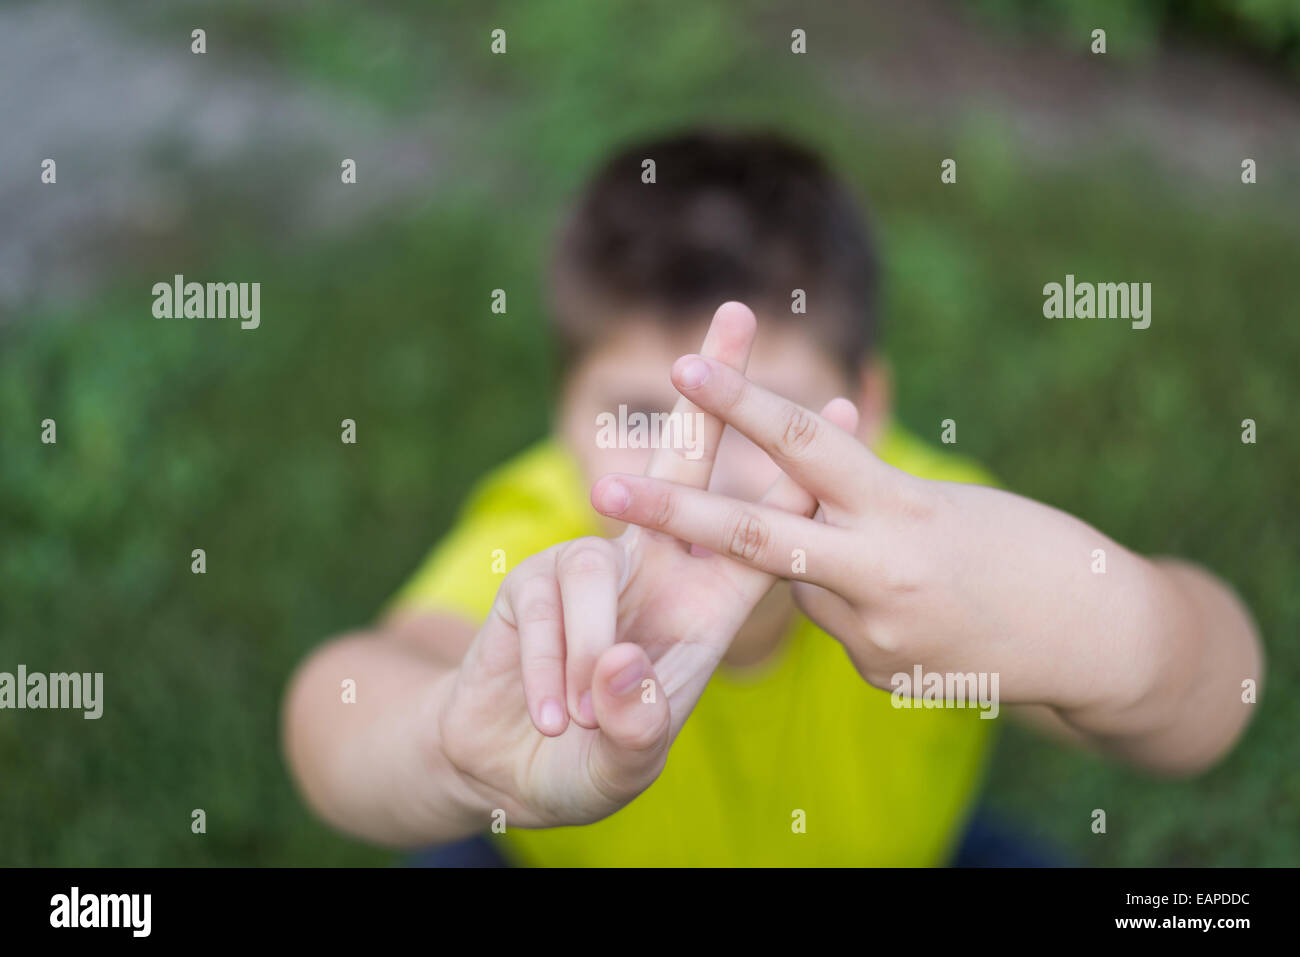 Boy shows sign gesture prison bars Stock Photo